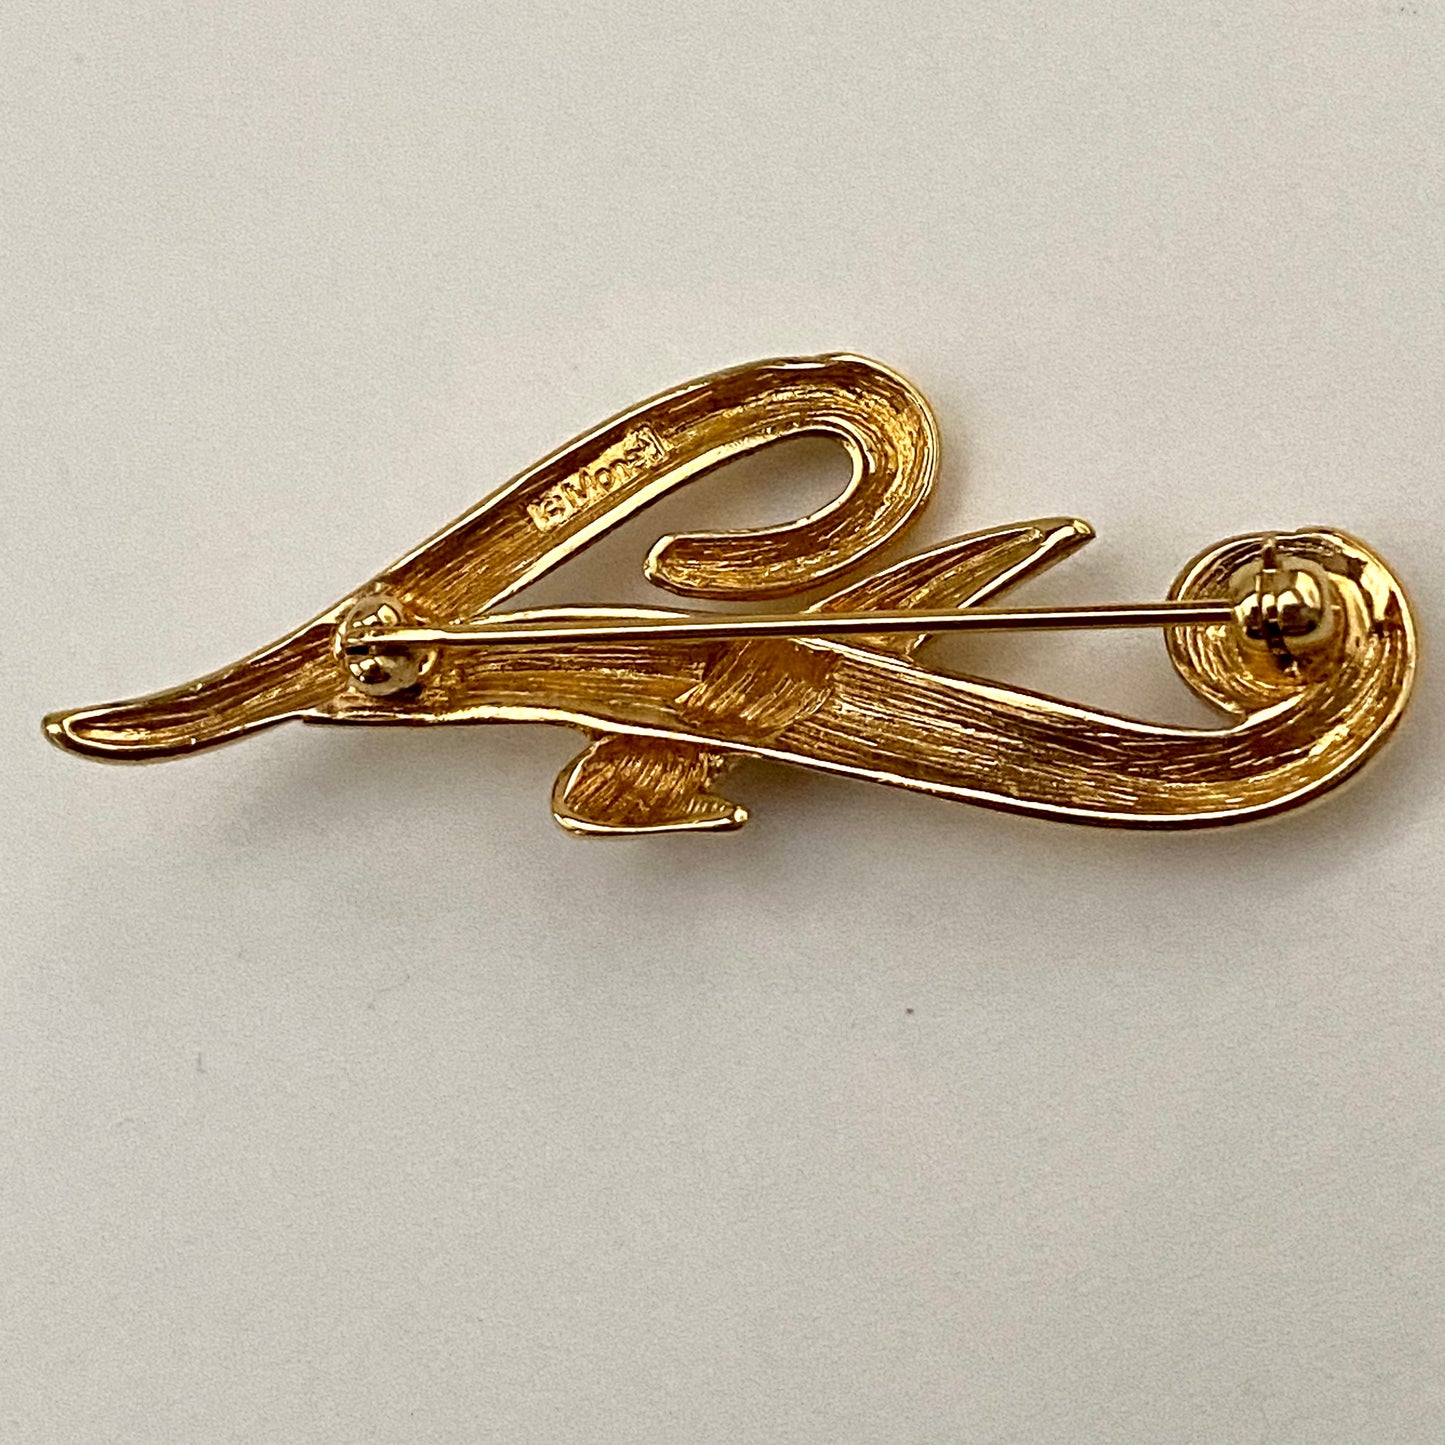 Late 80s/ Early 90s Monet Brooch